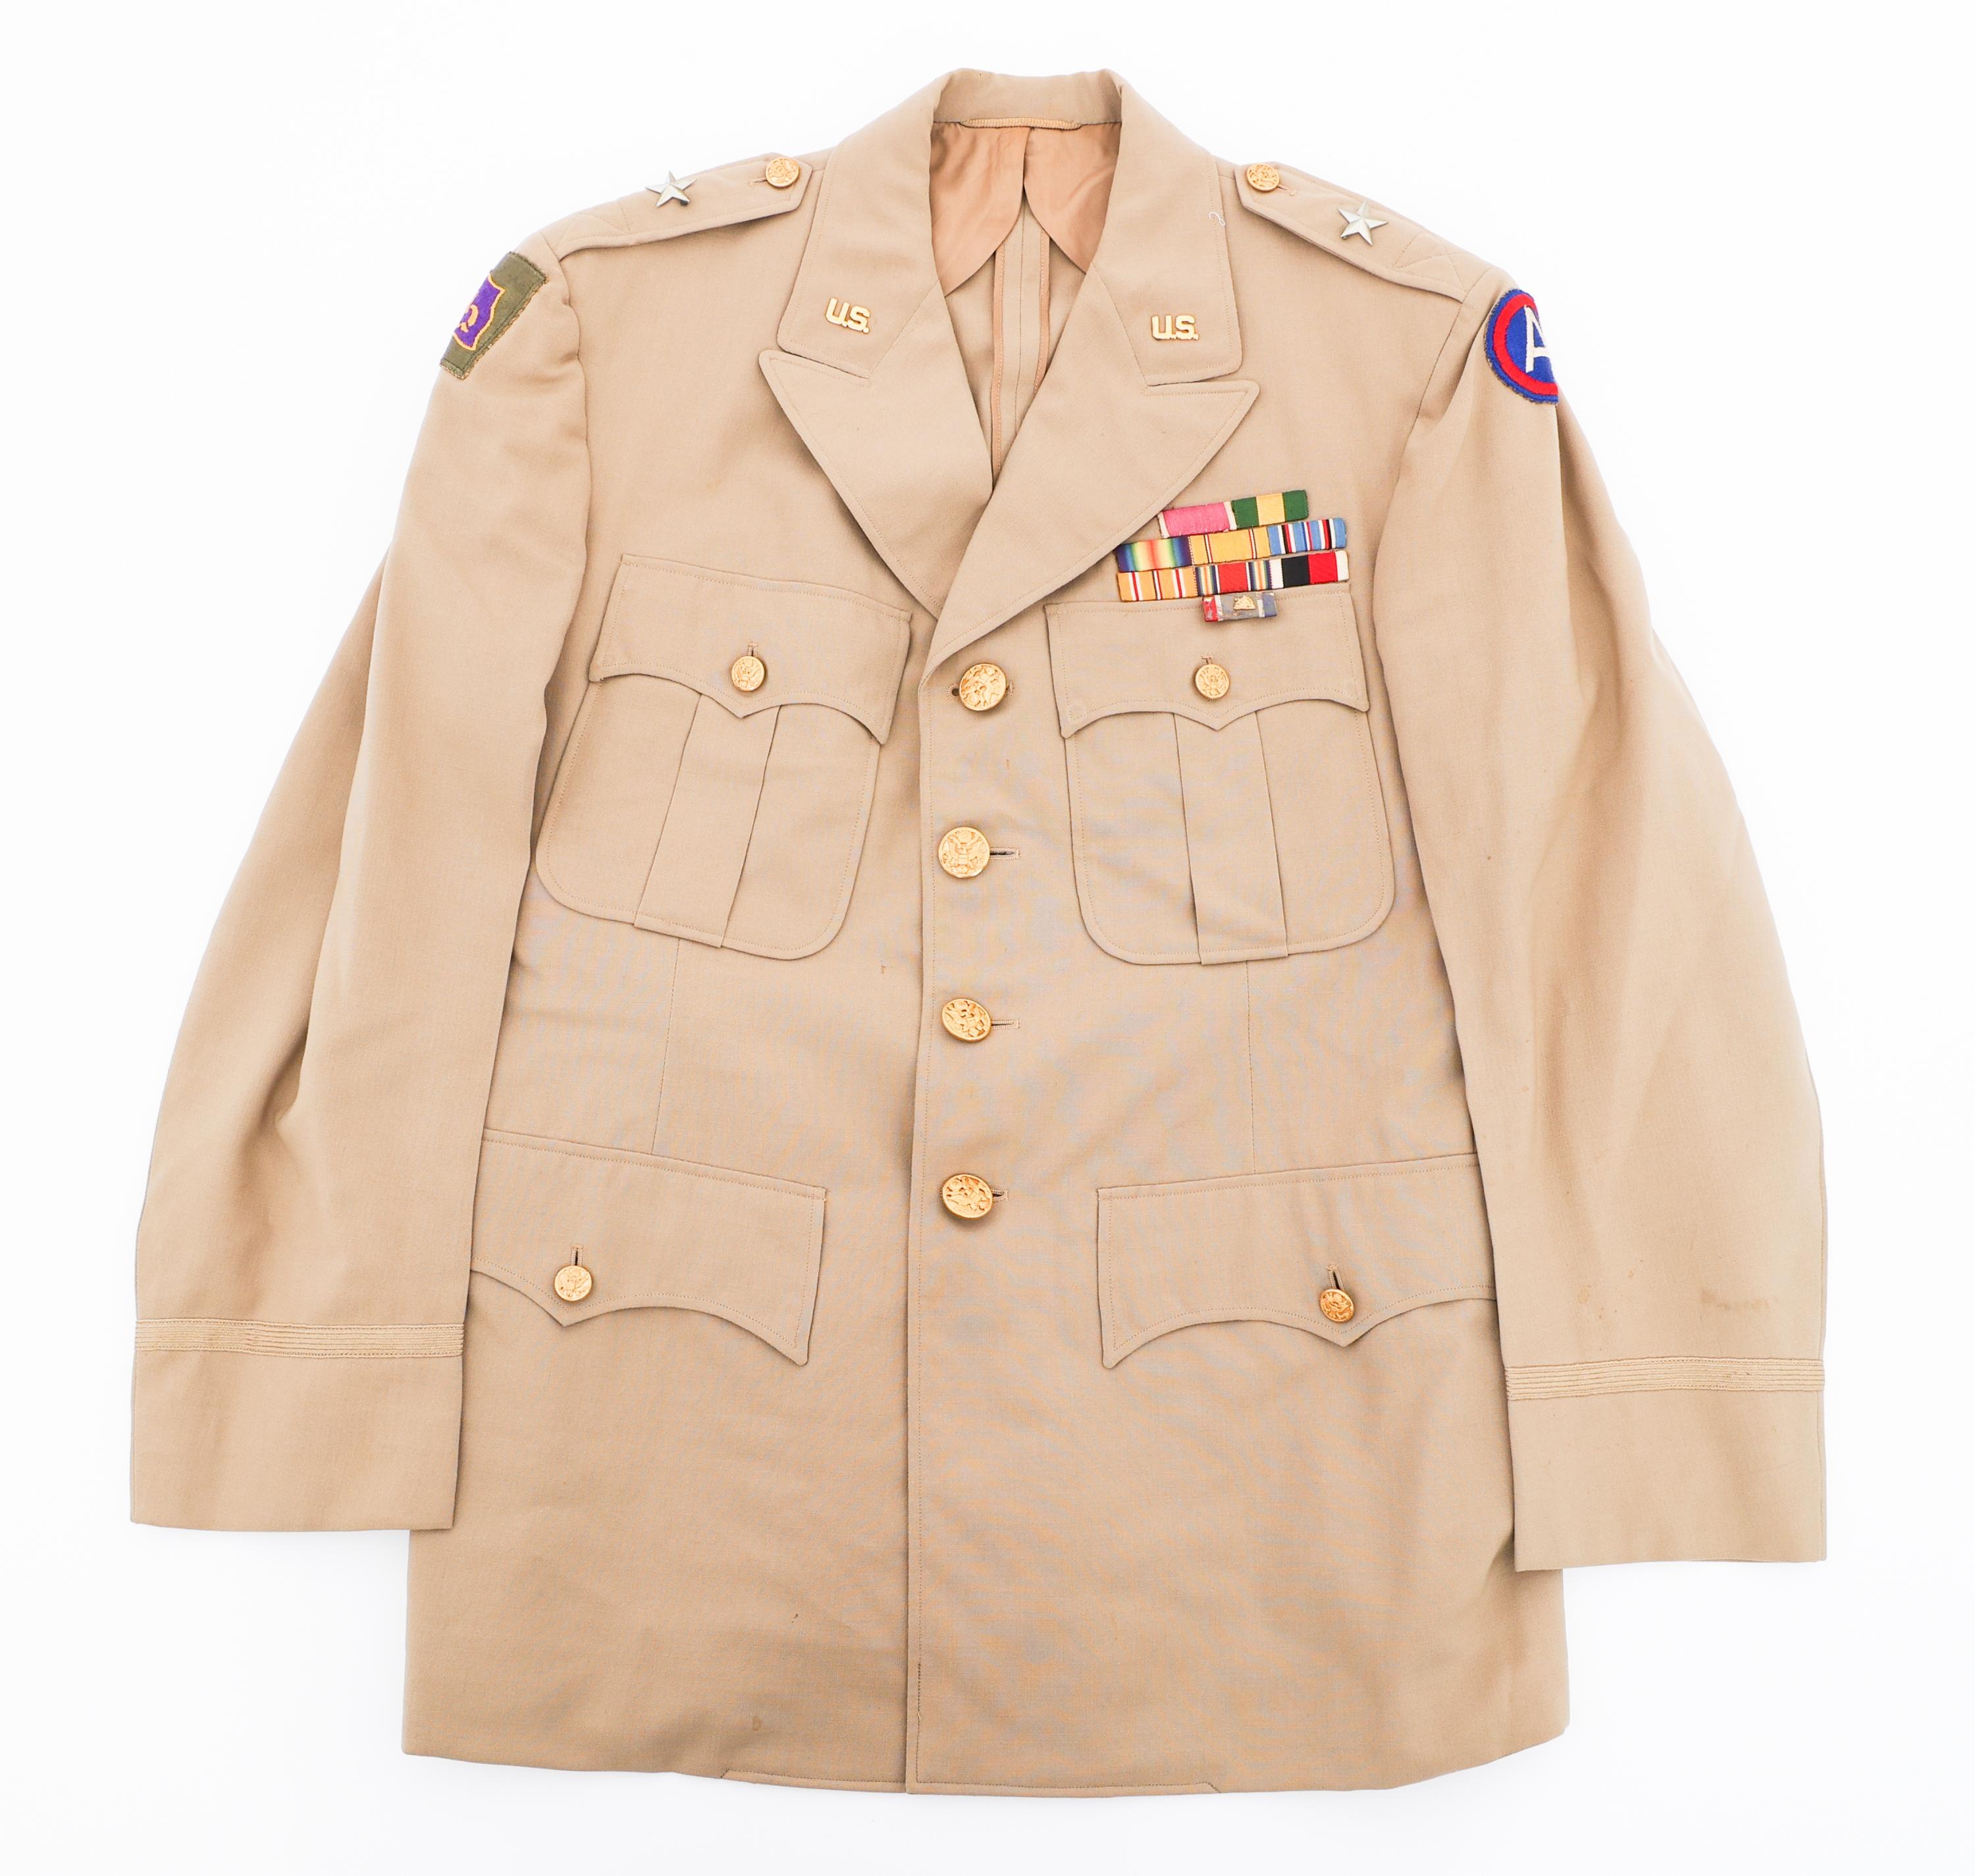 WWII US ARMY NAMED BRIG GENERAL UNIFORM GROUPING